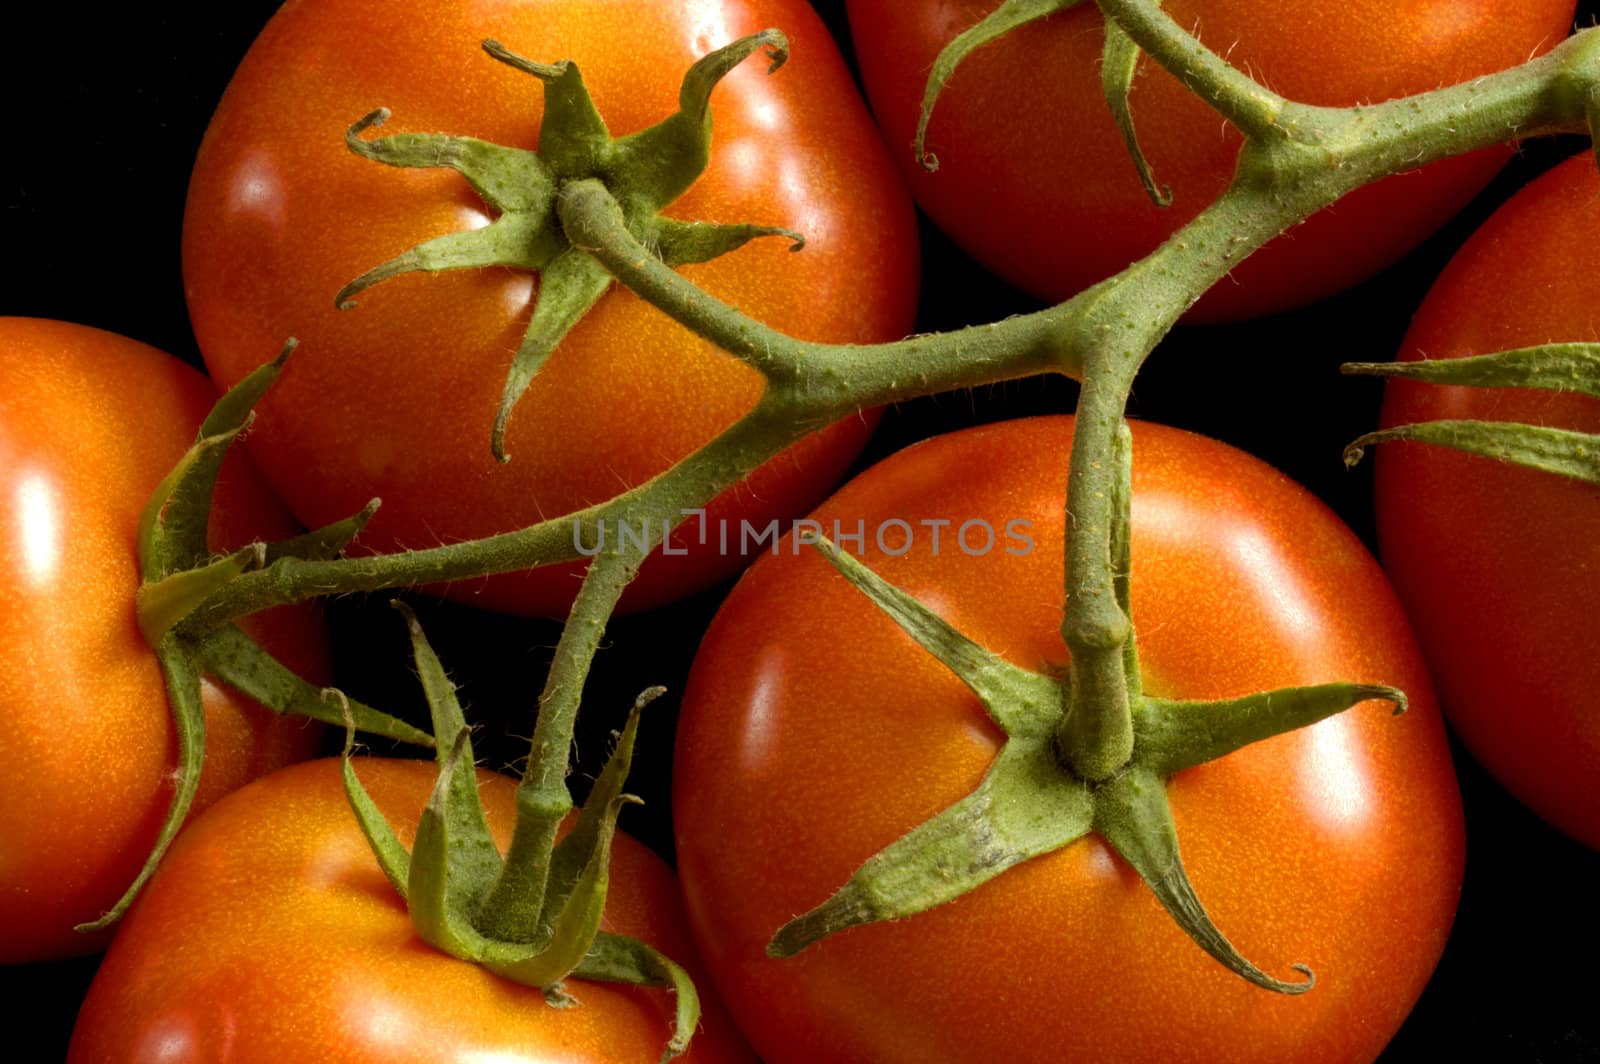 Tomatoes on the vine by Bateleur